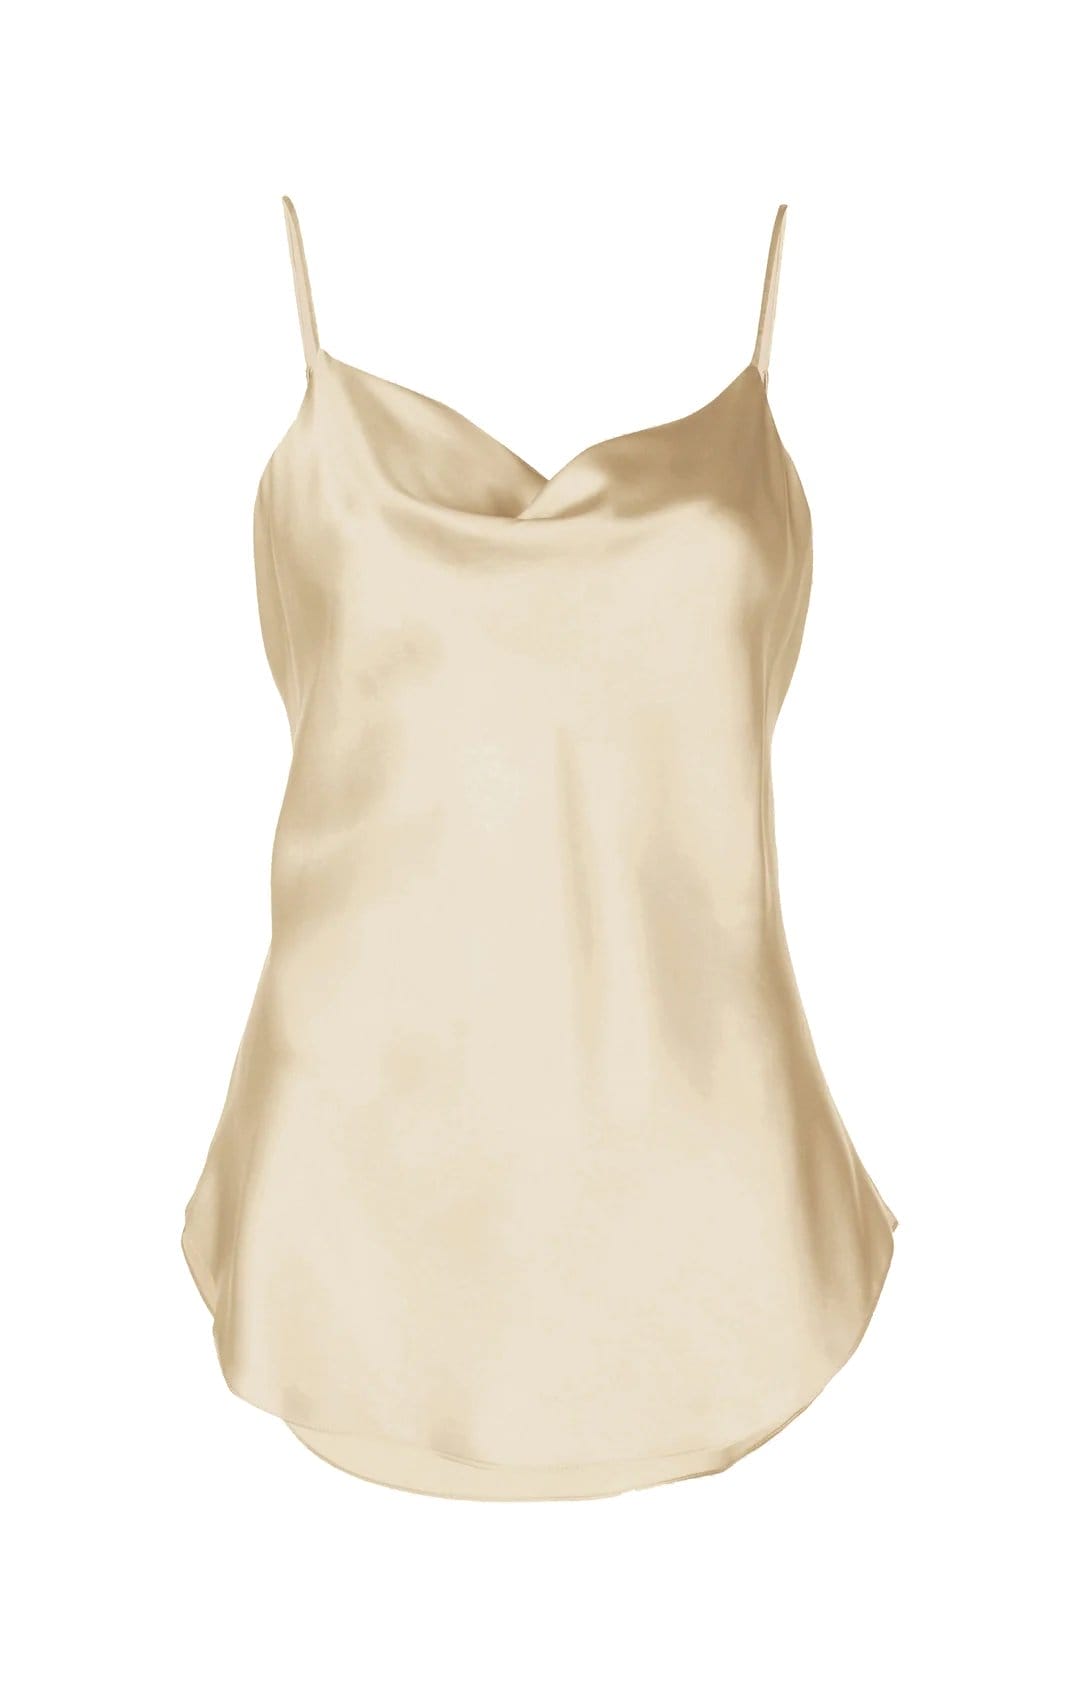 https://cinqasept.nyc/collections/haute-hues-au-naturel/products/marta-cami-in-khaki